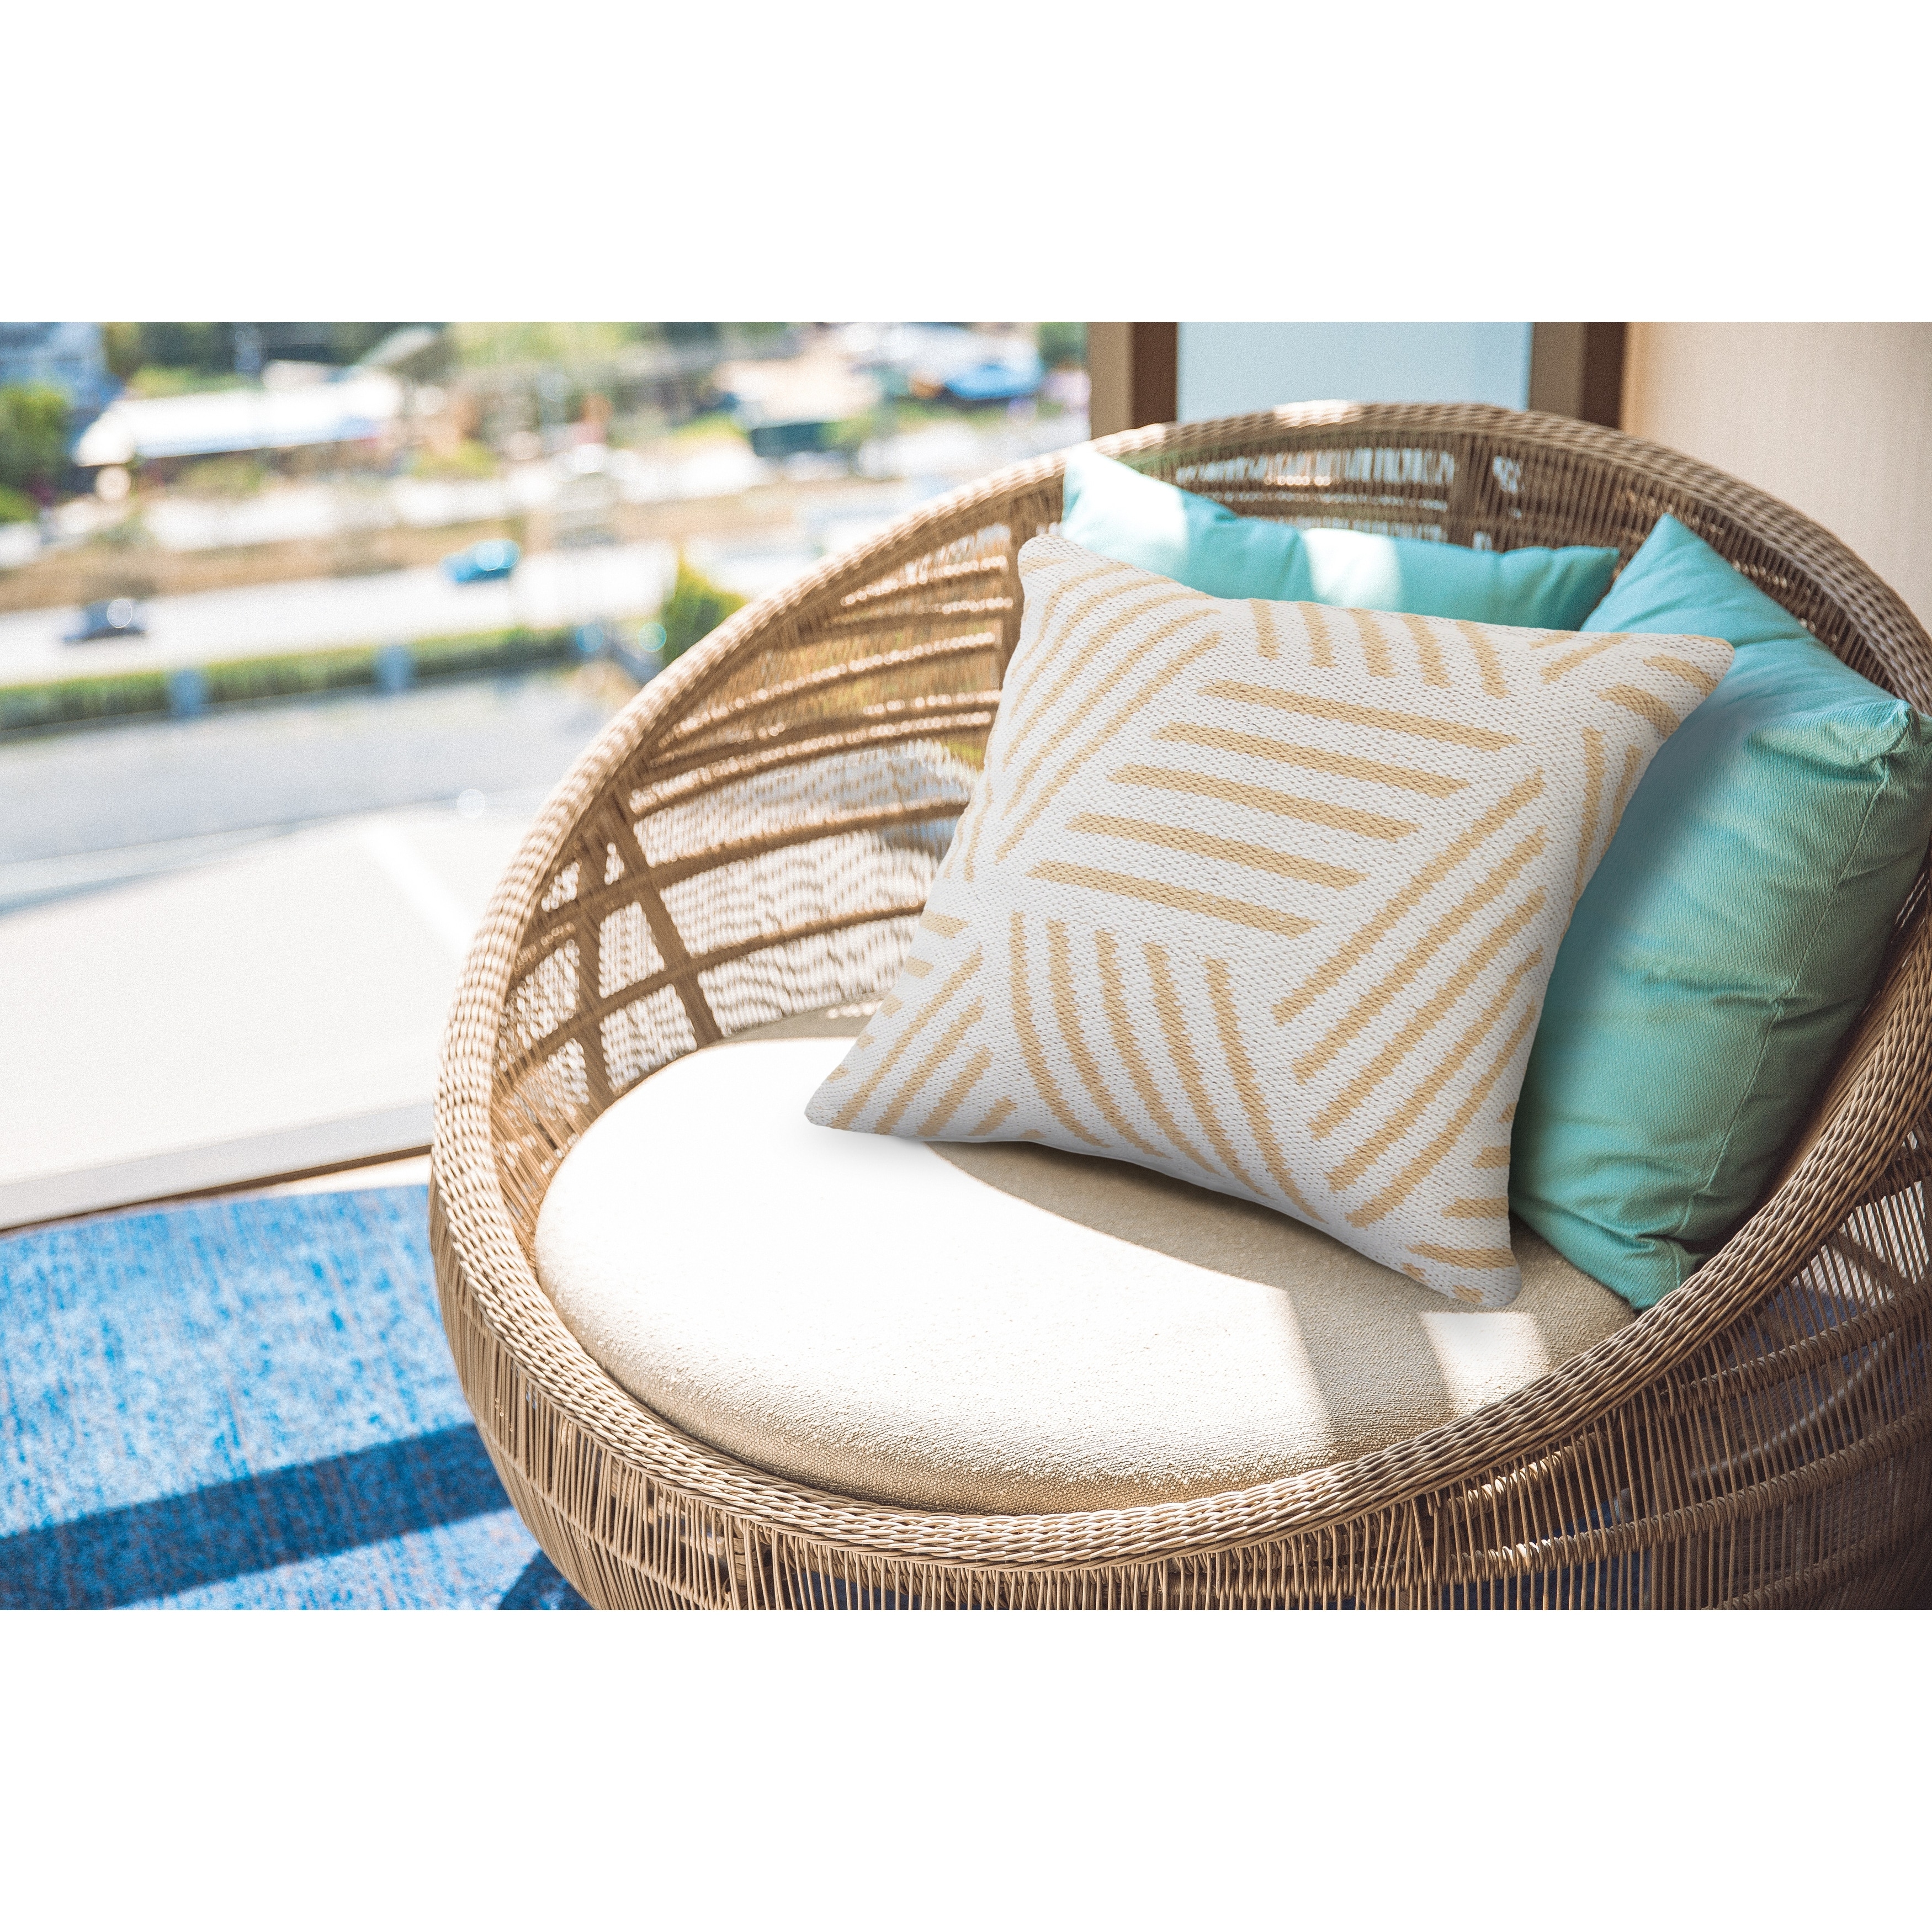 https://ak1.ostkcdn.com/images/products/is/images/direct/0747b035cb57674454d6775e87a1d91086e9f806/Tan-and-White-Geometric-Striped-Throw-Pillow%C2%A0.jpg